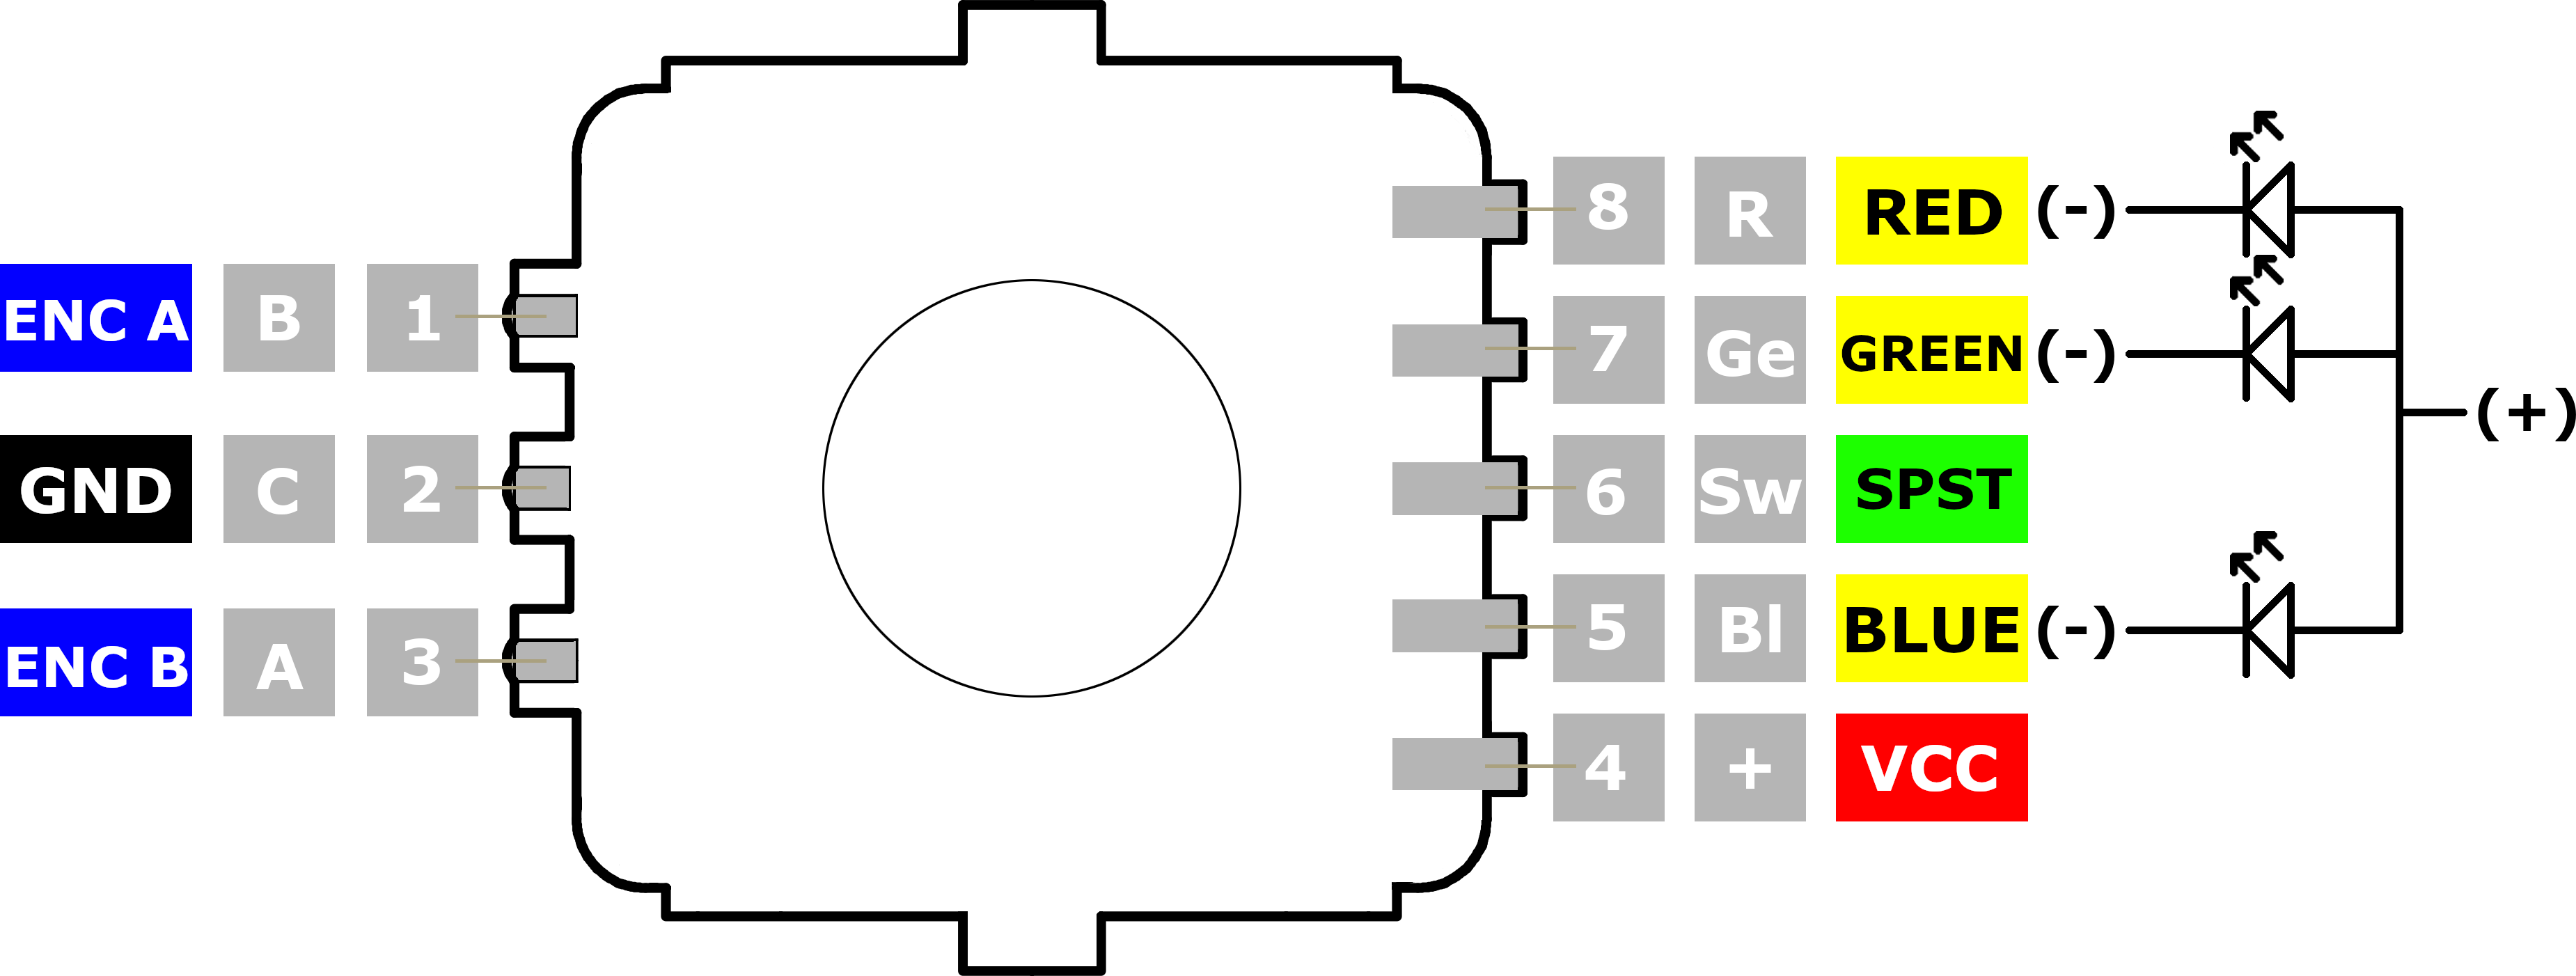 The circuit diagram for the rotary encoder. Three pins on the left have 3 labels each, the encoder label, the actual encoder letter and the pin number. The top pin is labelled "Encoder A, B, 1". The middle pin is labelled "Ground, C, 2" and the bottom pin is labelled "Encoder B, A, 3." The right side has 5 pins, also with 3 labels, the pin numbers go down from 8 until 4, the second labels are shorthand for their colours, if they are colour pins. Pin 4 is power and has a plus. Pin 6 is the SPDT switch. Pins 8, 7 and 5 are the colours red, green and blue respectively and are all marked as positive input diodes